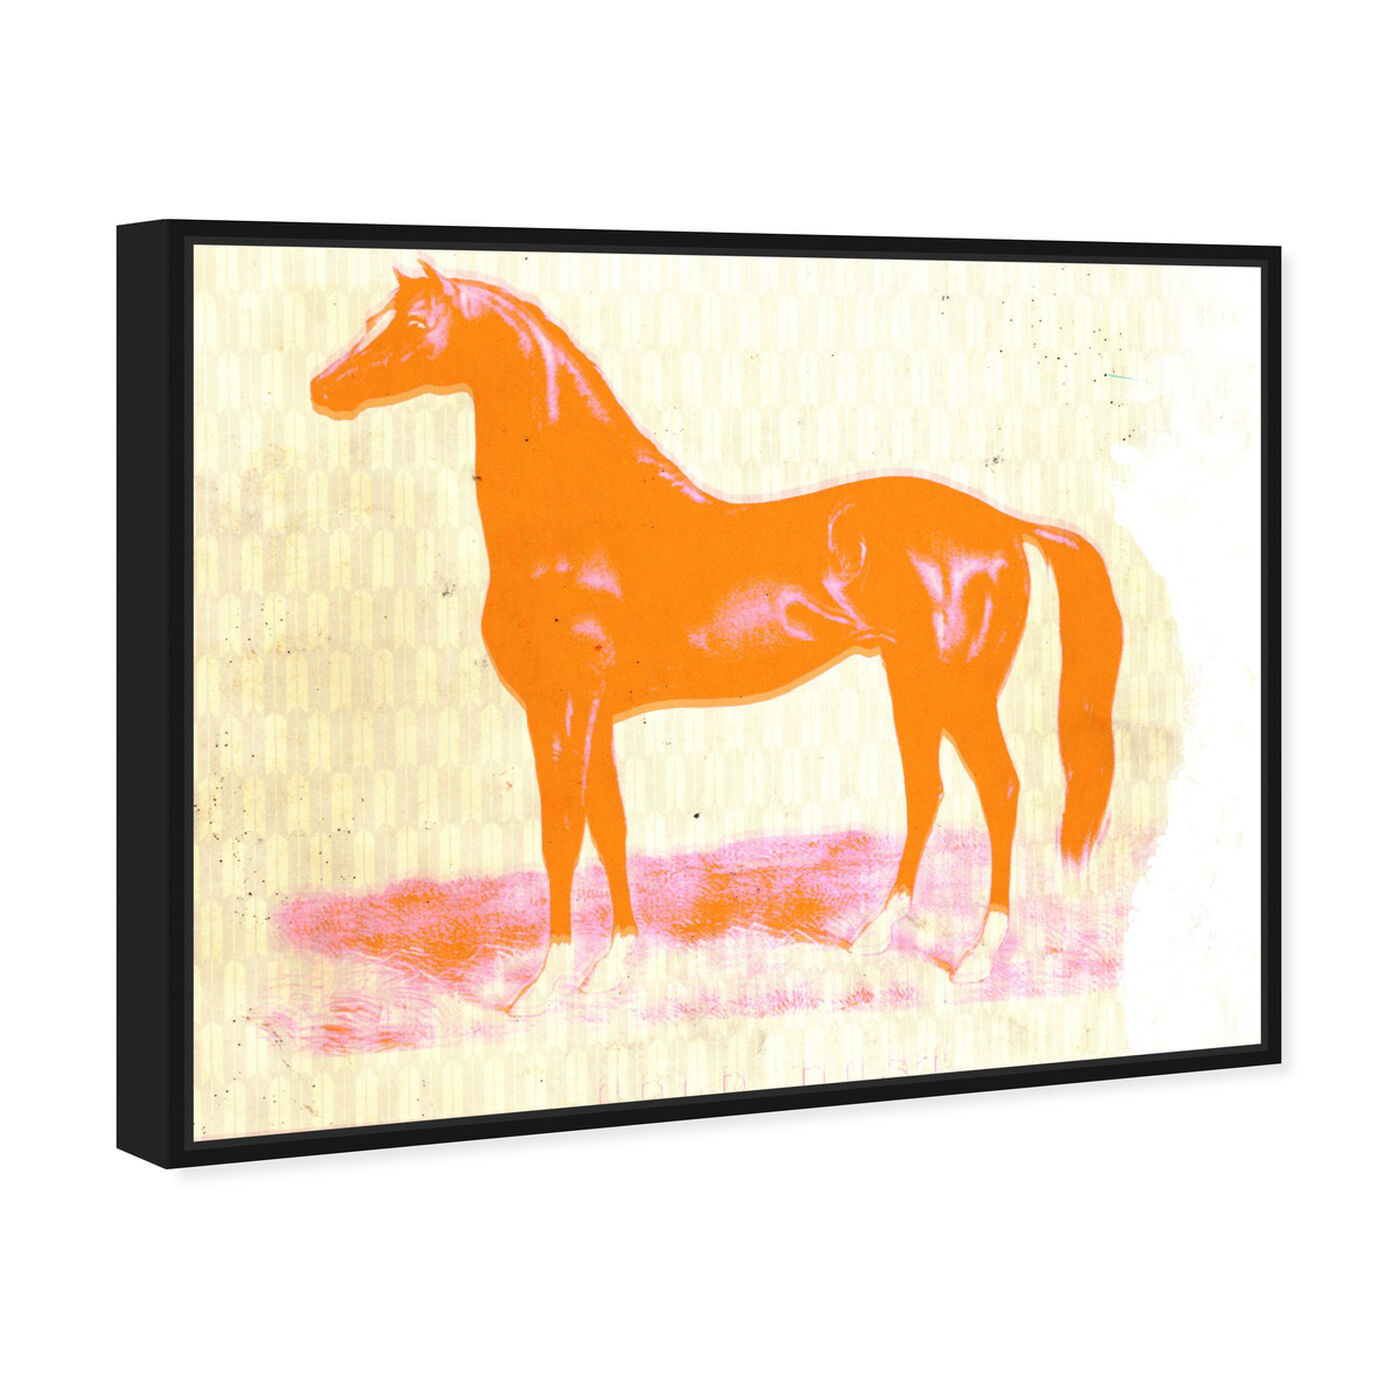 Angled view of Gold Dust Horse By Carson Kressley featuring animals and farm animals art.